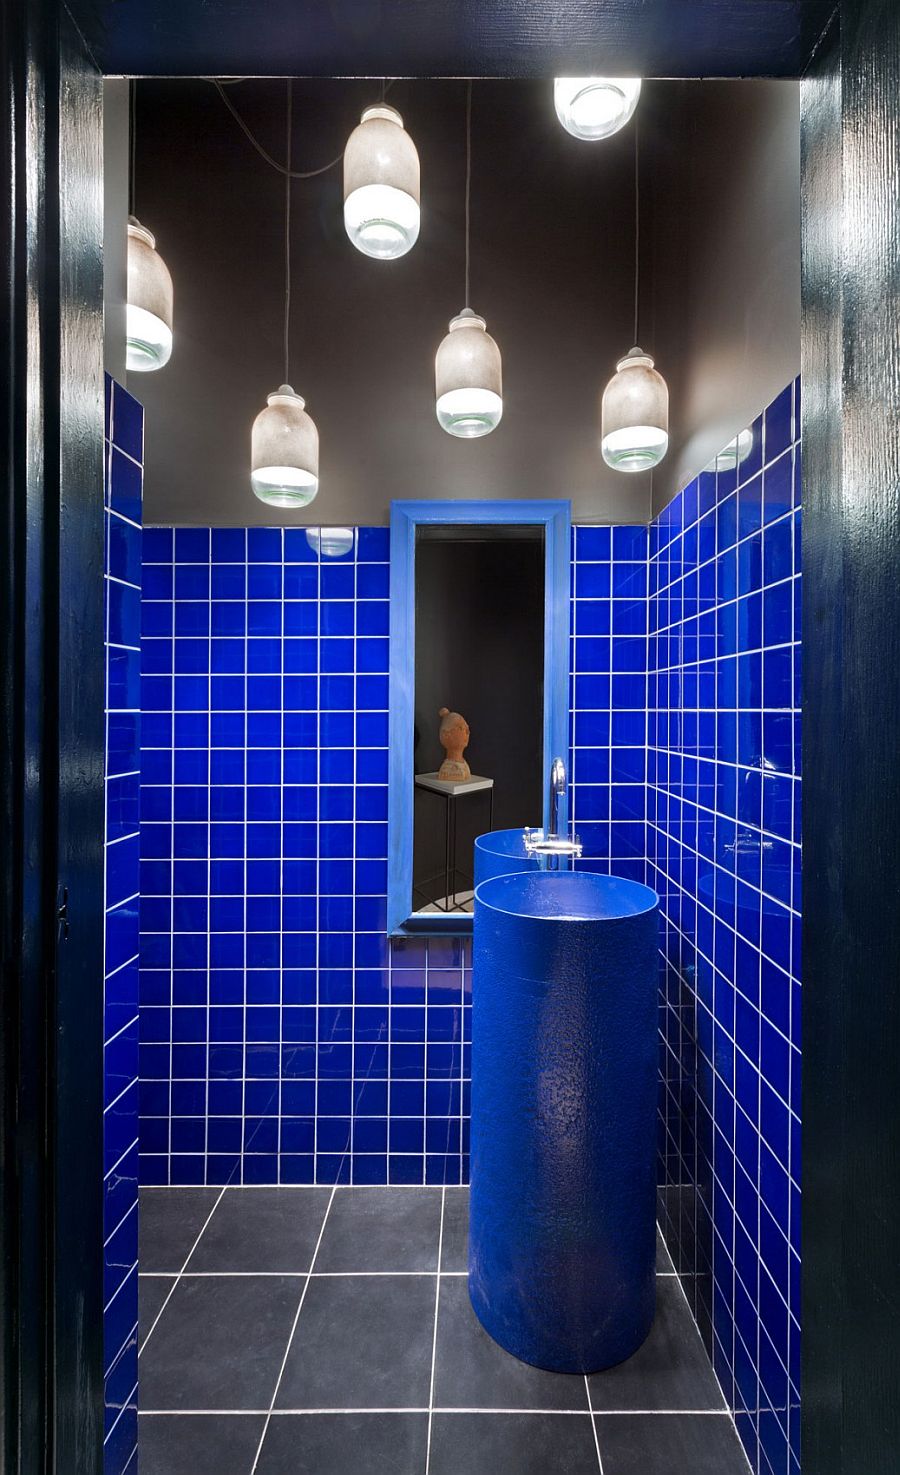 Massive industrial pipe turned into custom sink inside the small bathroom with bright blue walls